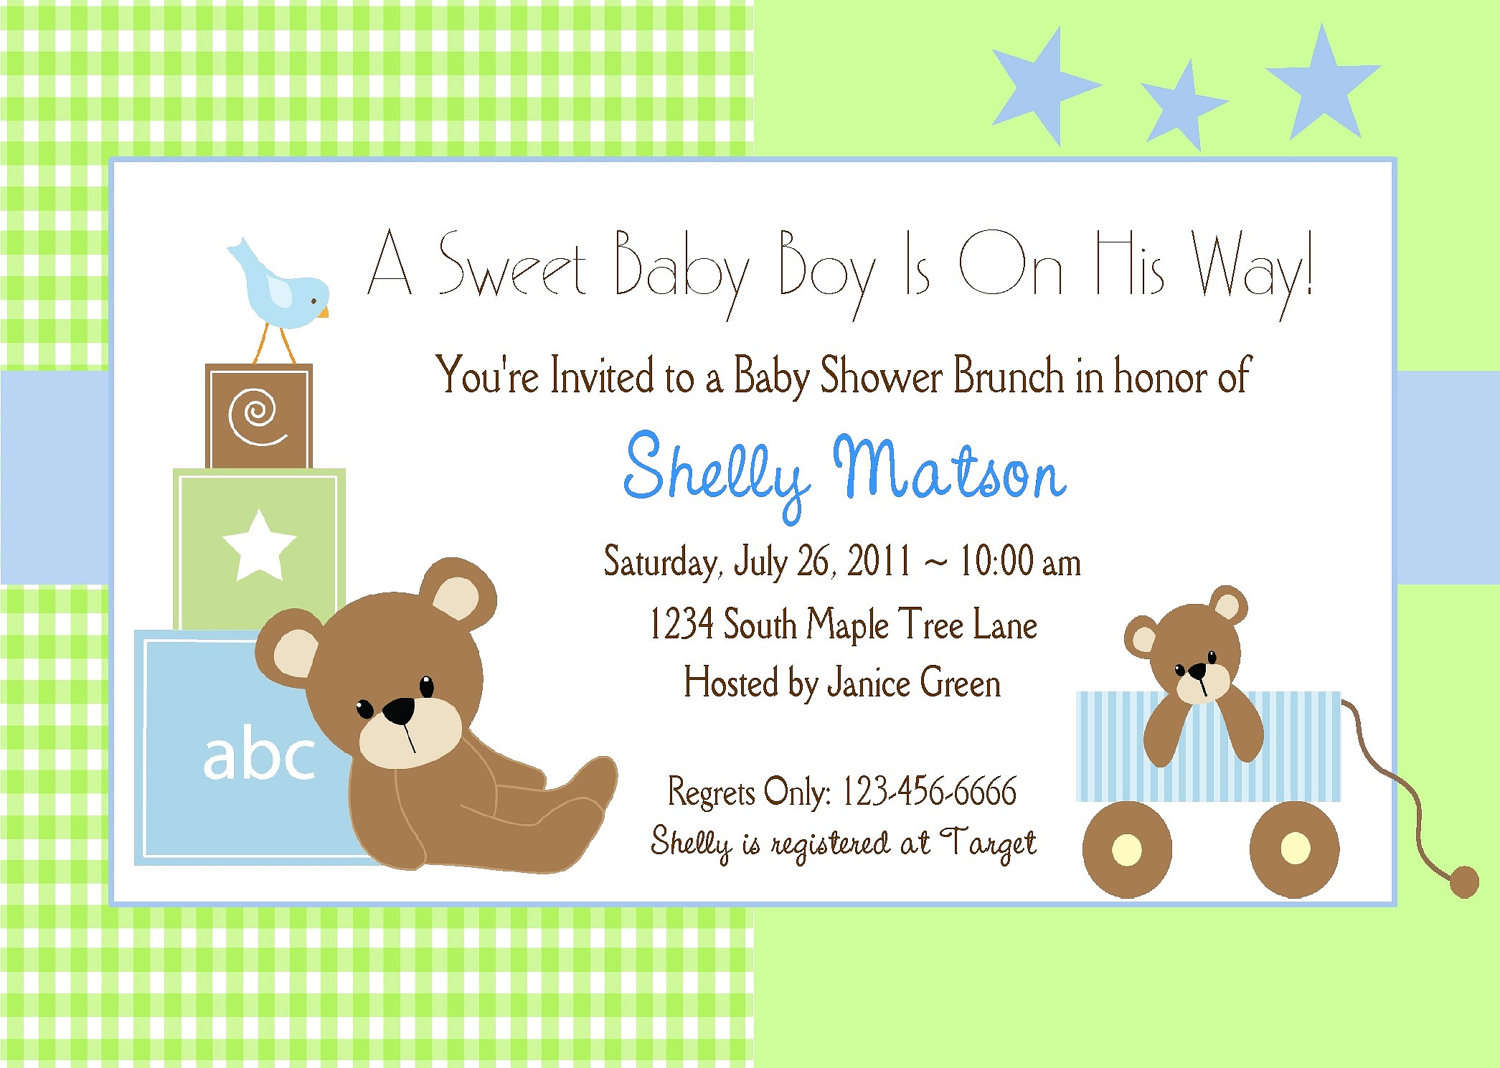 Making Your Own Funny Baby Shower Invitations | FREE ...